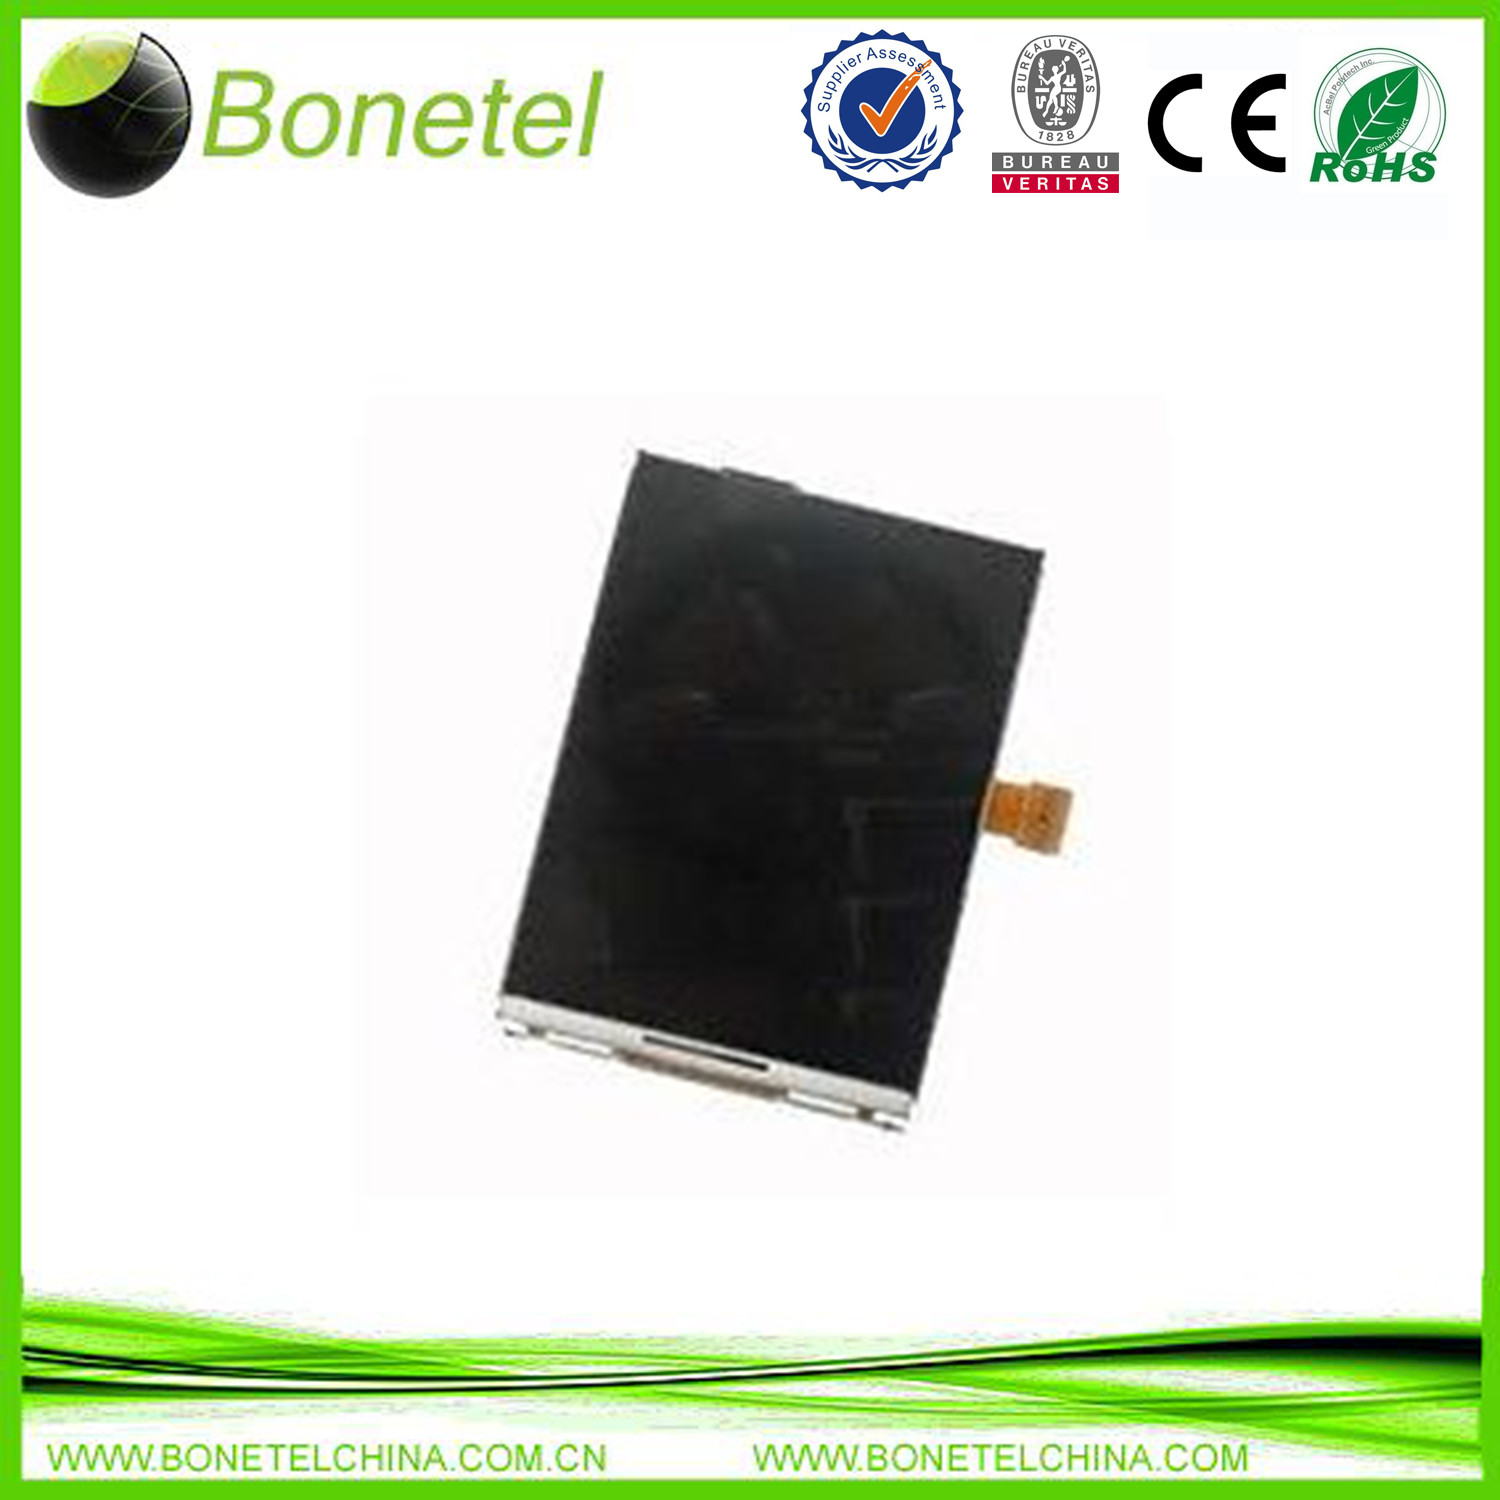 Genuine LCD Screen Display Replacement Panel For Samsung GT S3850 Corby 2 II